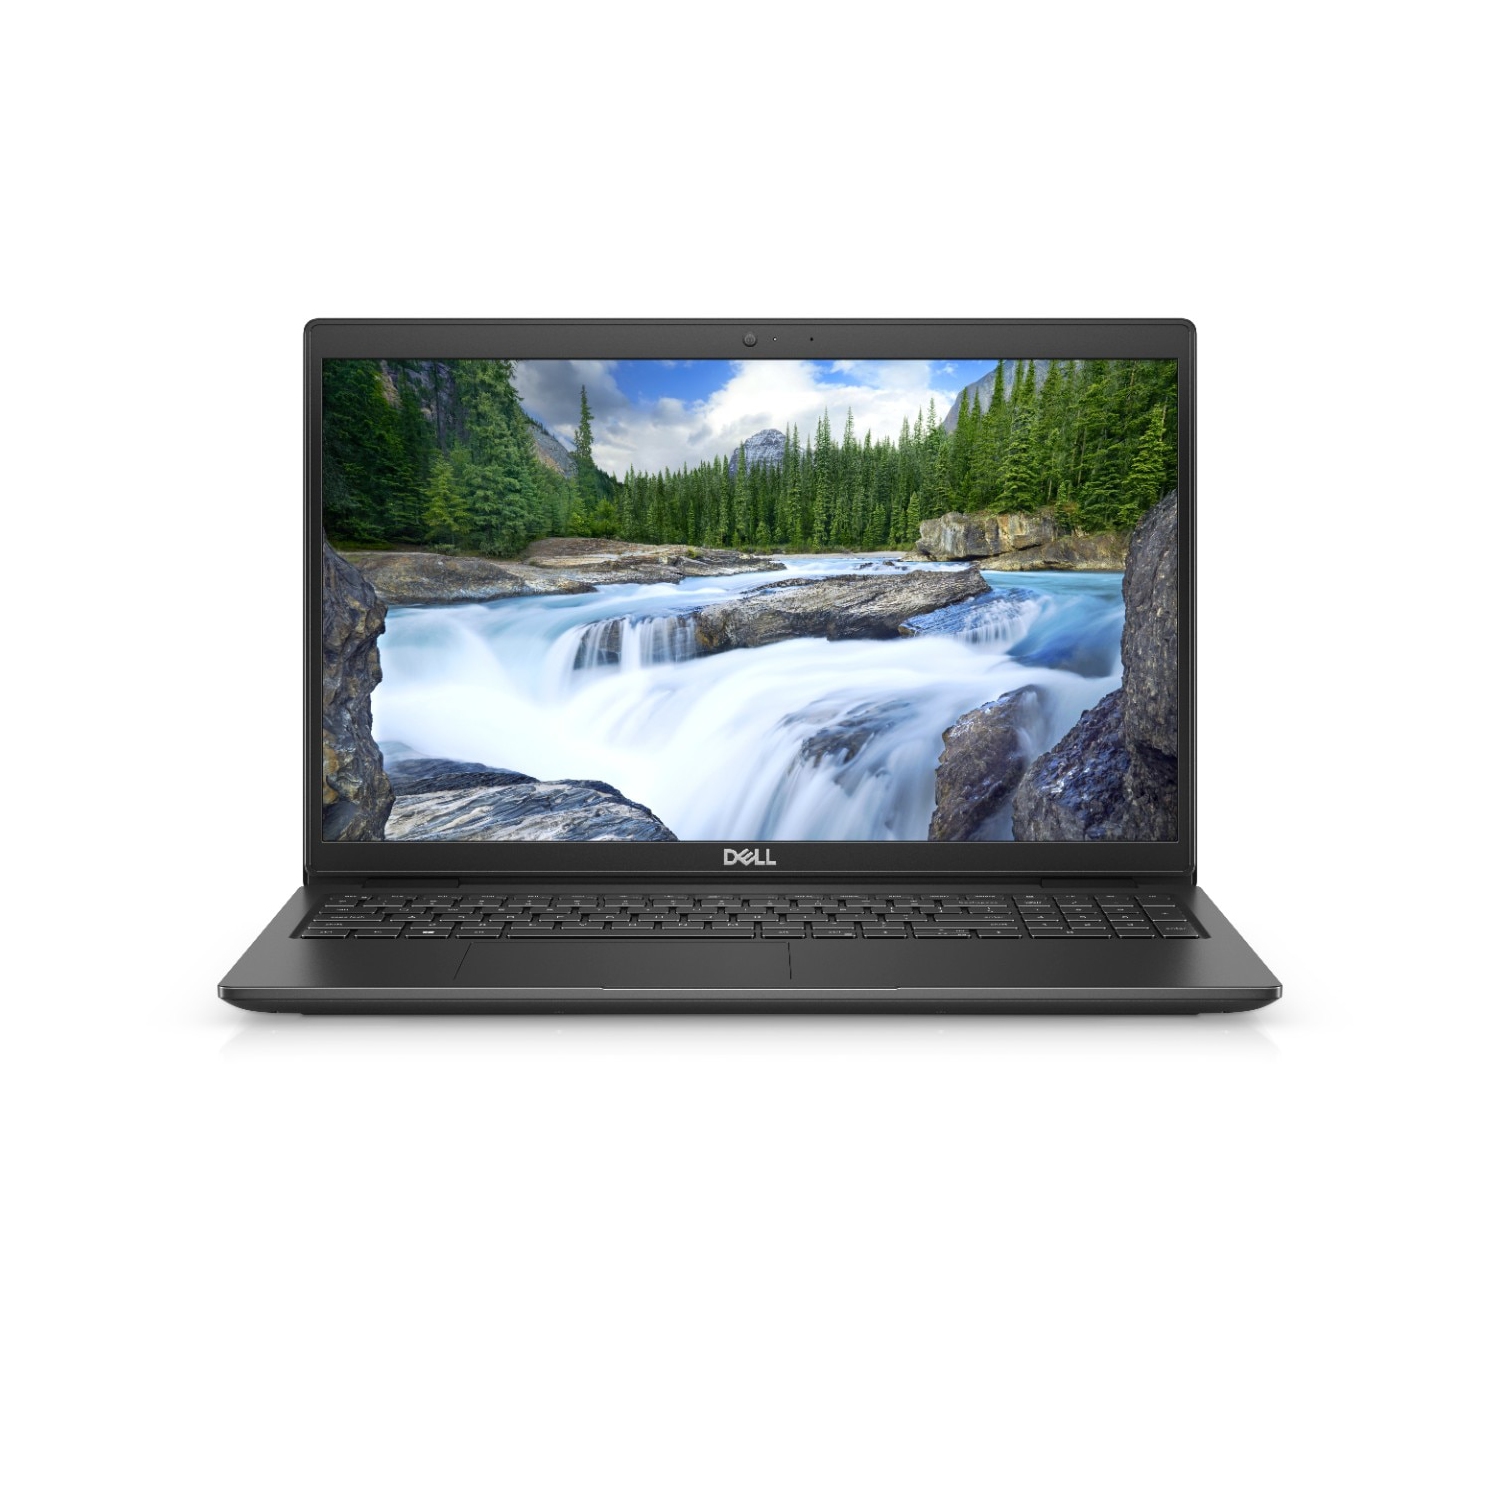 Refurbished (Excellent) - Dell Latitude 3000 3520 Laptop (2021) | 15.6" HD | Core i5 - 128GB SSD - 8GB RAM | 4 Cores @ 4.2 GHz - 11th Gen CPU Certified Refurbished